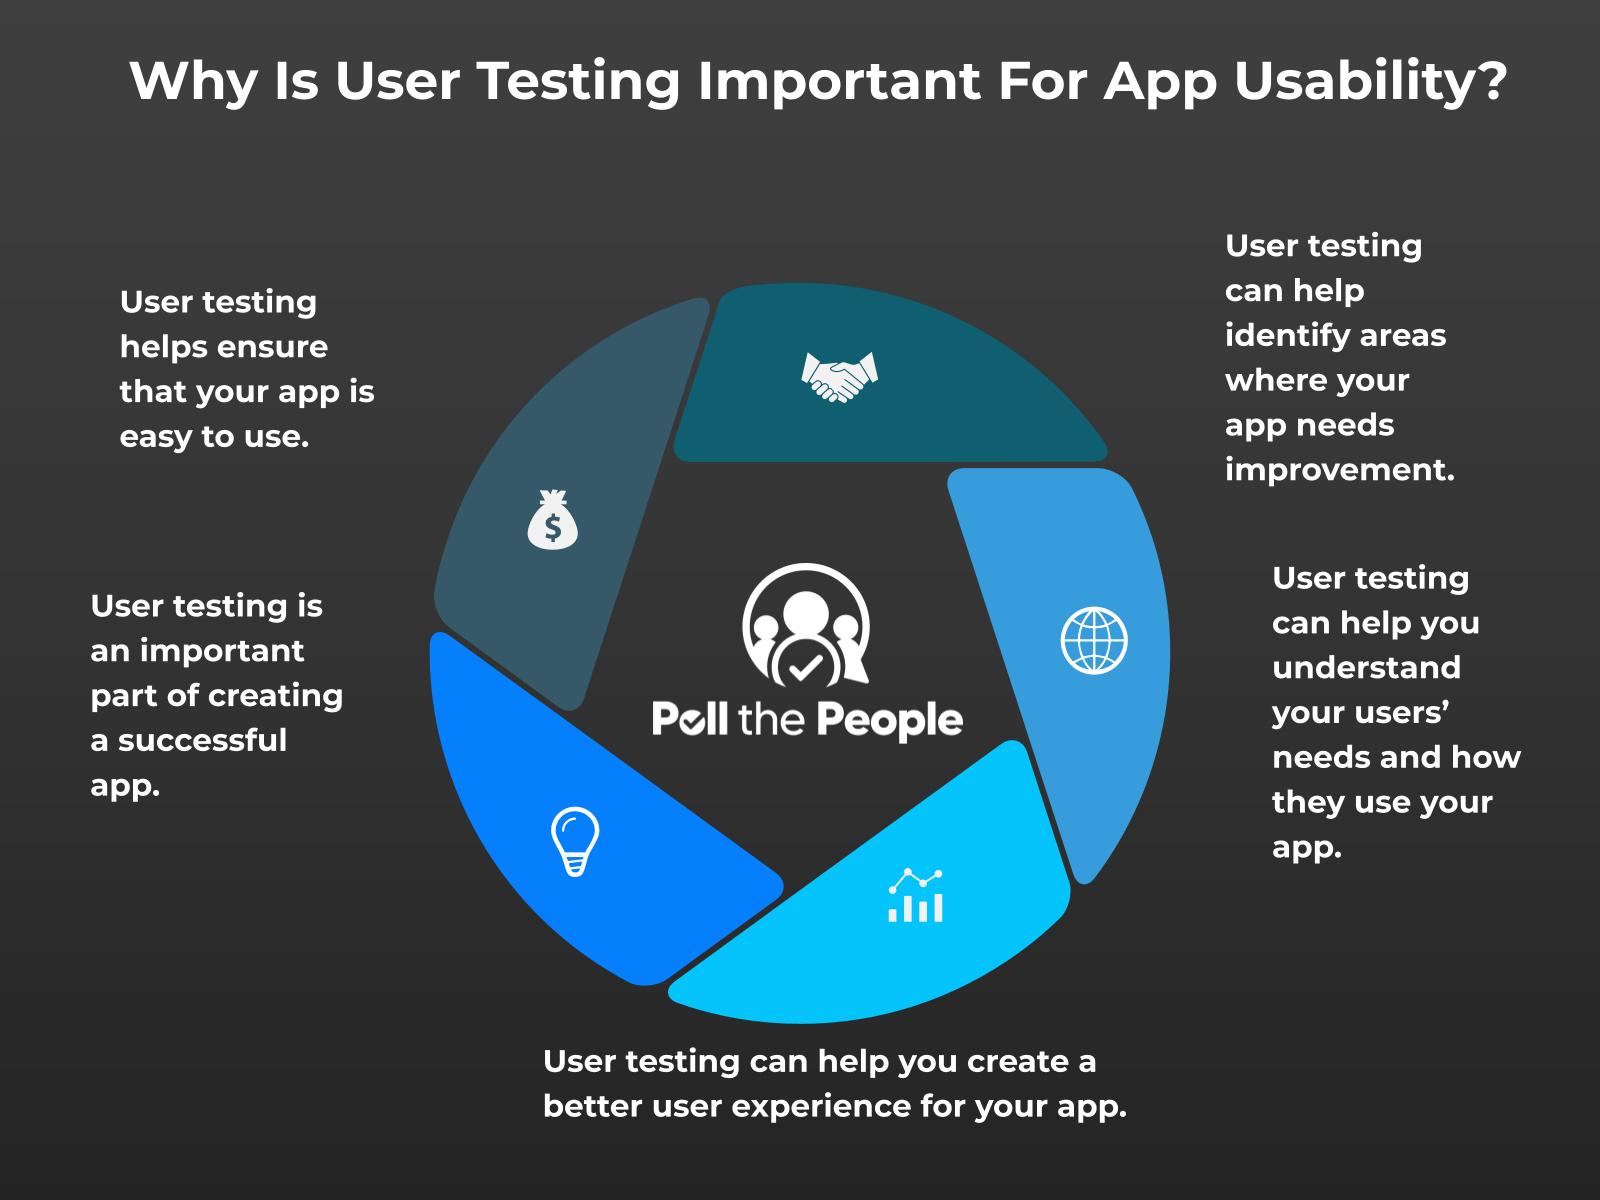 INFOGRAPHIC: Why is user testing important for app usability? - Poll the People